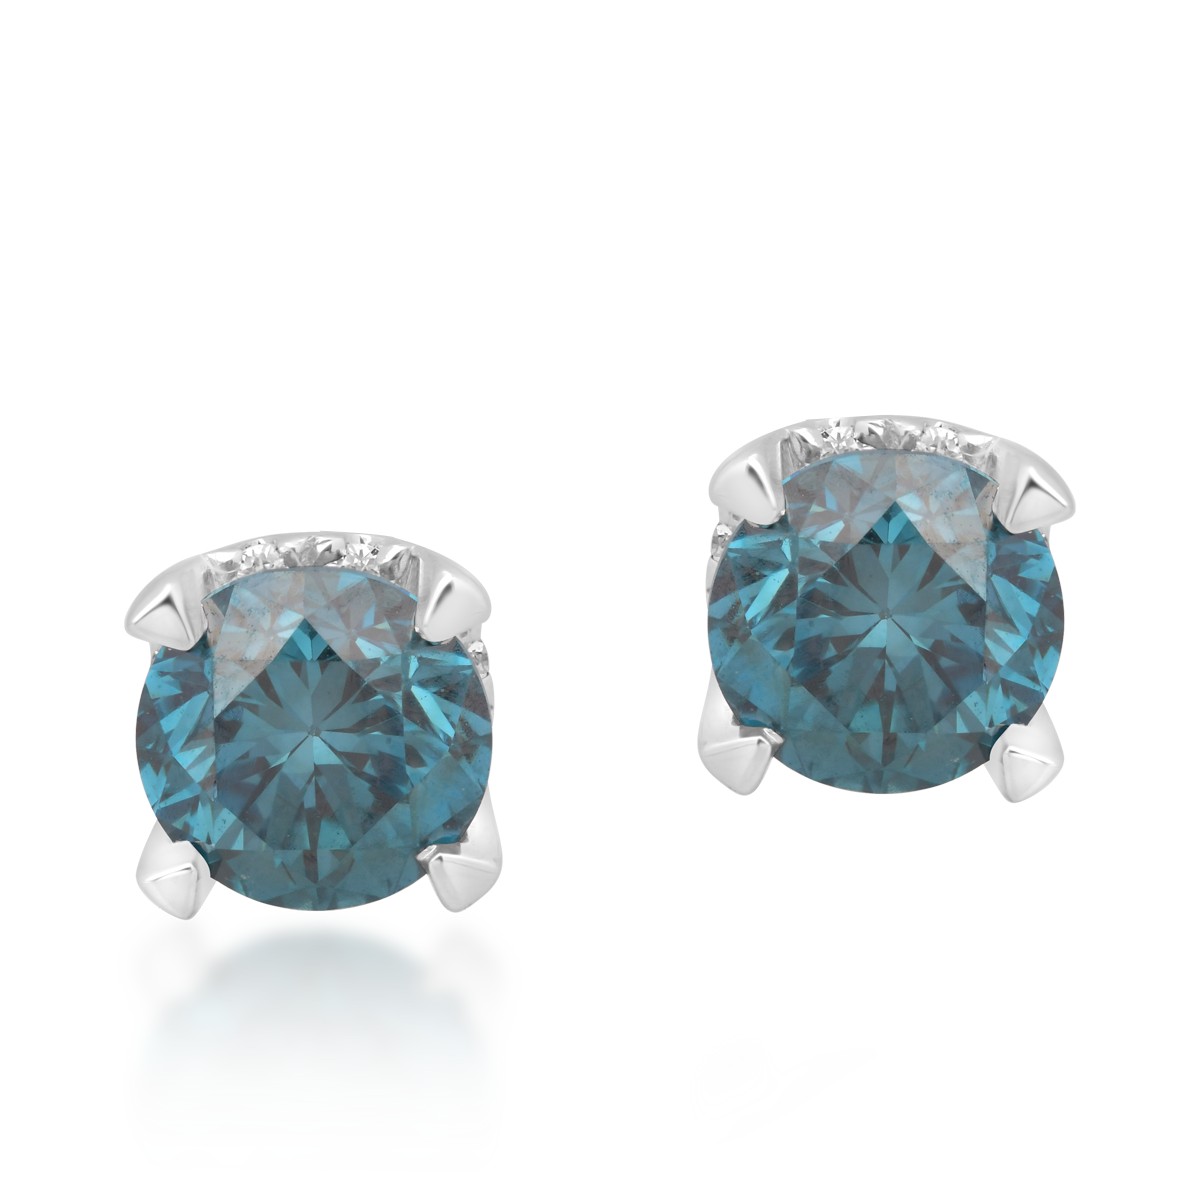 18K white gold earrings with blue diamonds of 1.04ct and clear diamonds of 0.1ct